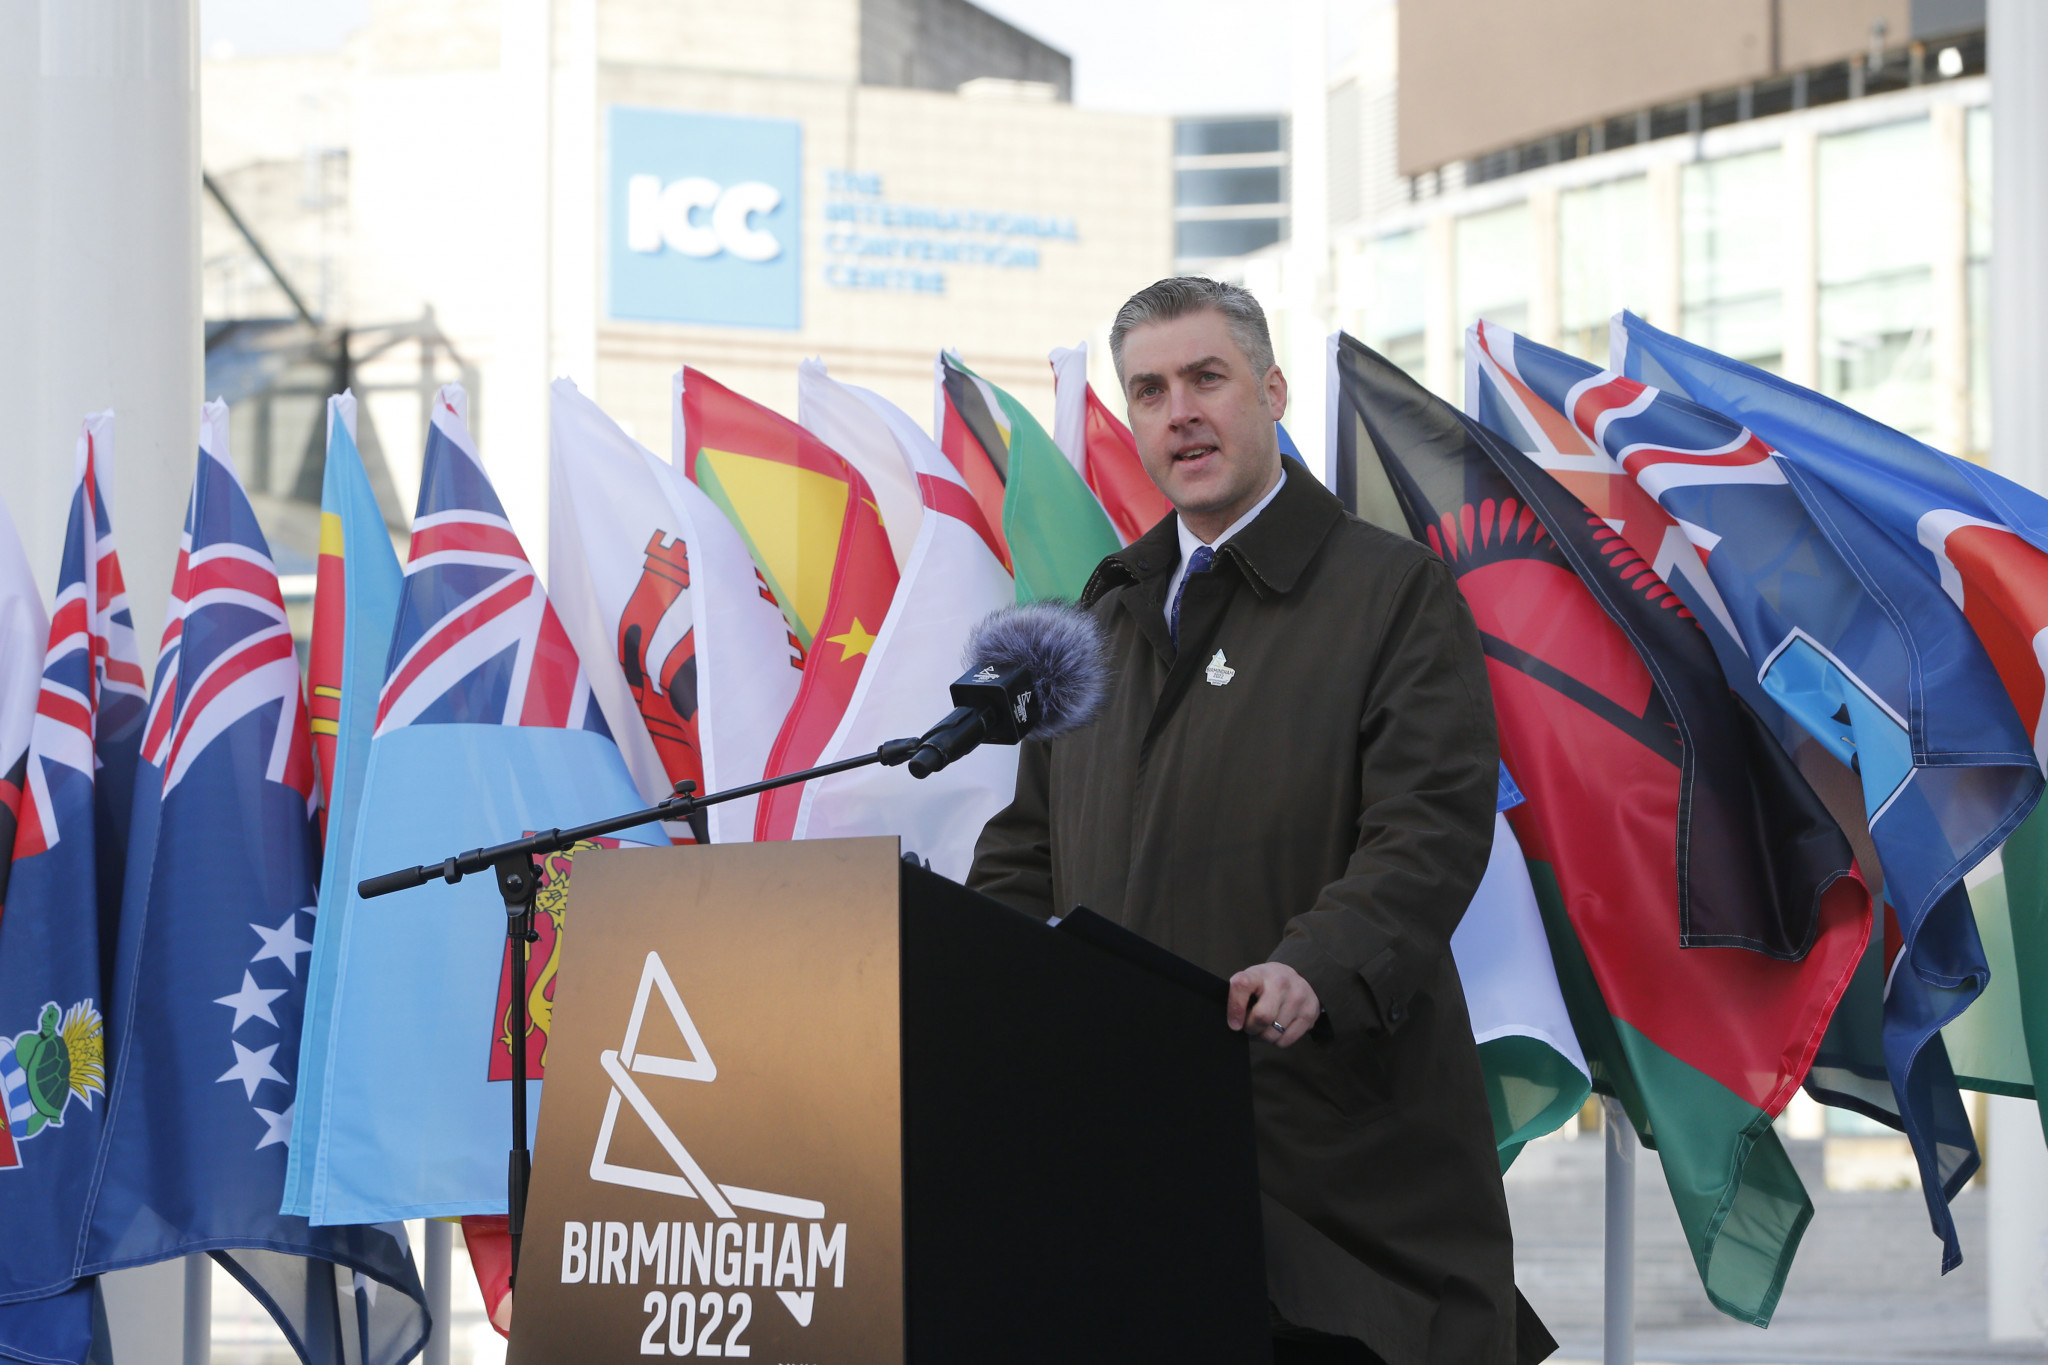 Ian Reid: Getting set for the Birmingham 2022 Commonwealth Games with six months to go